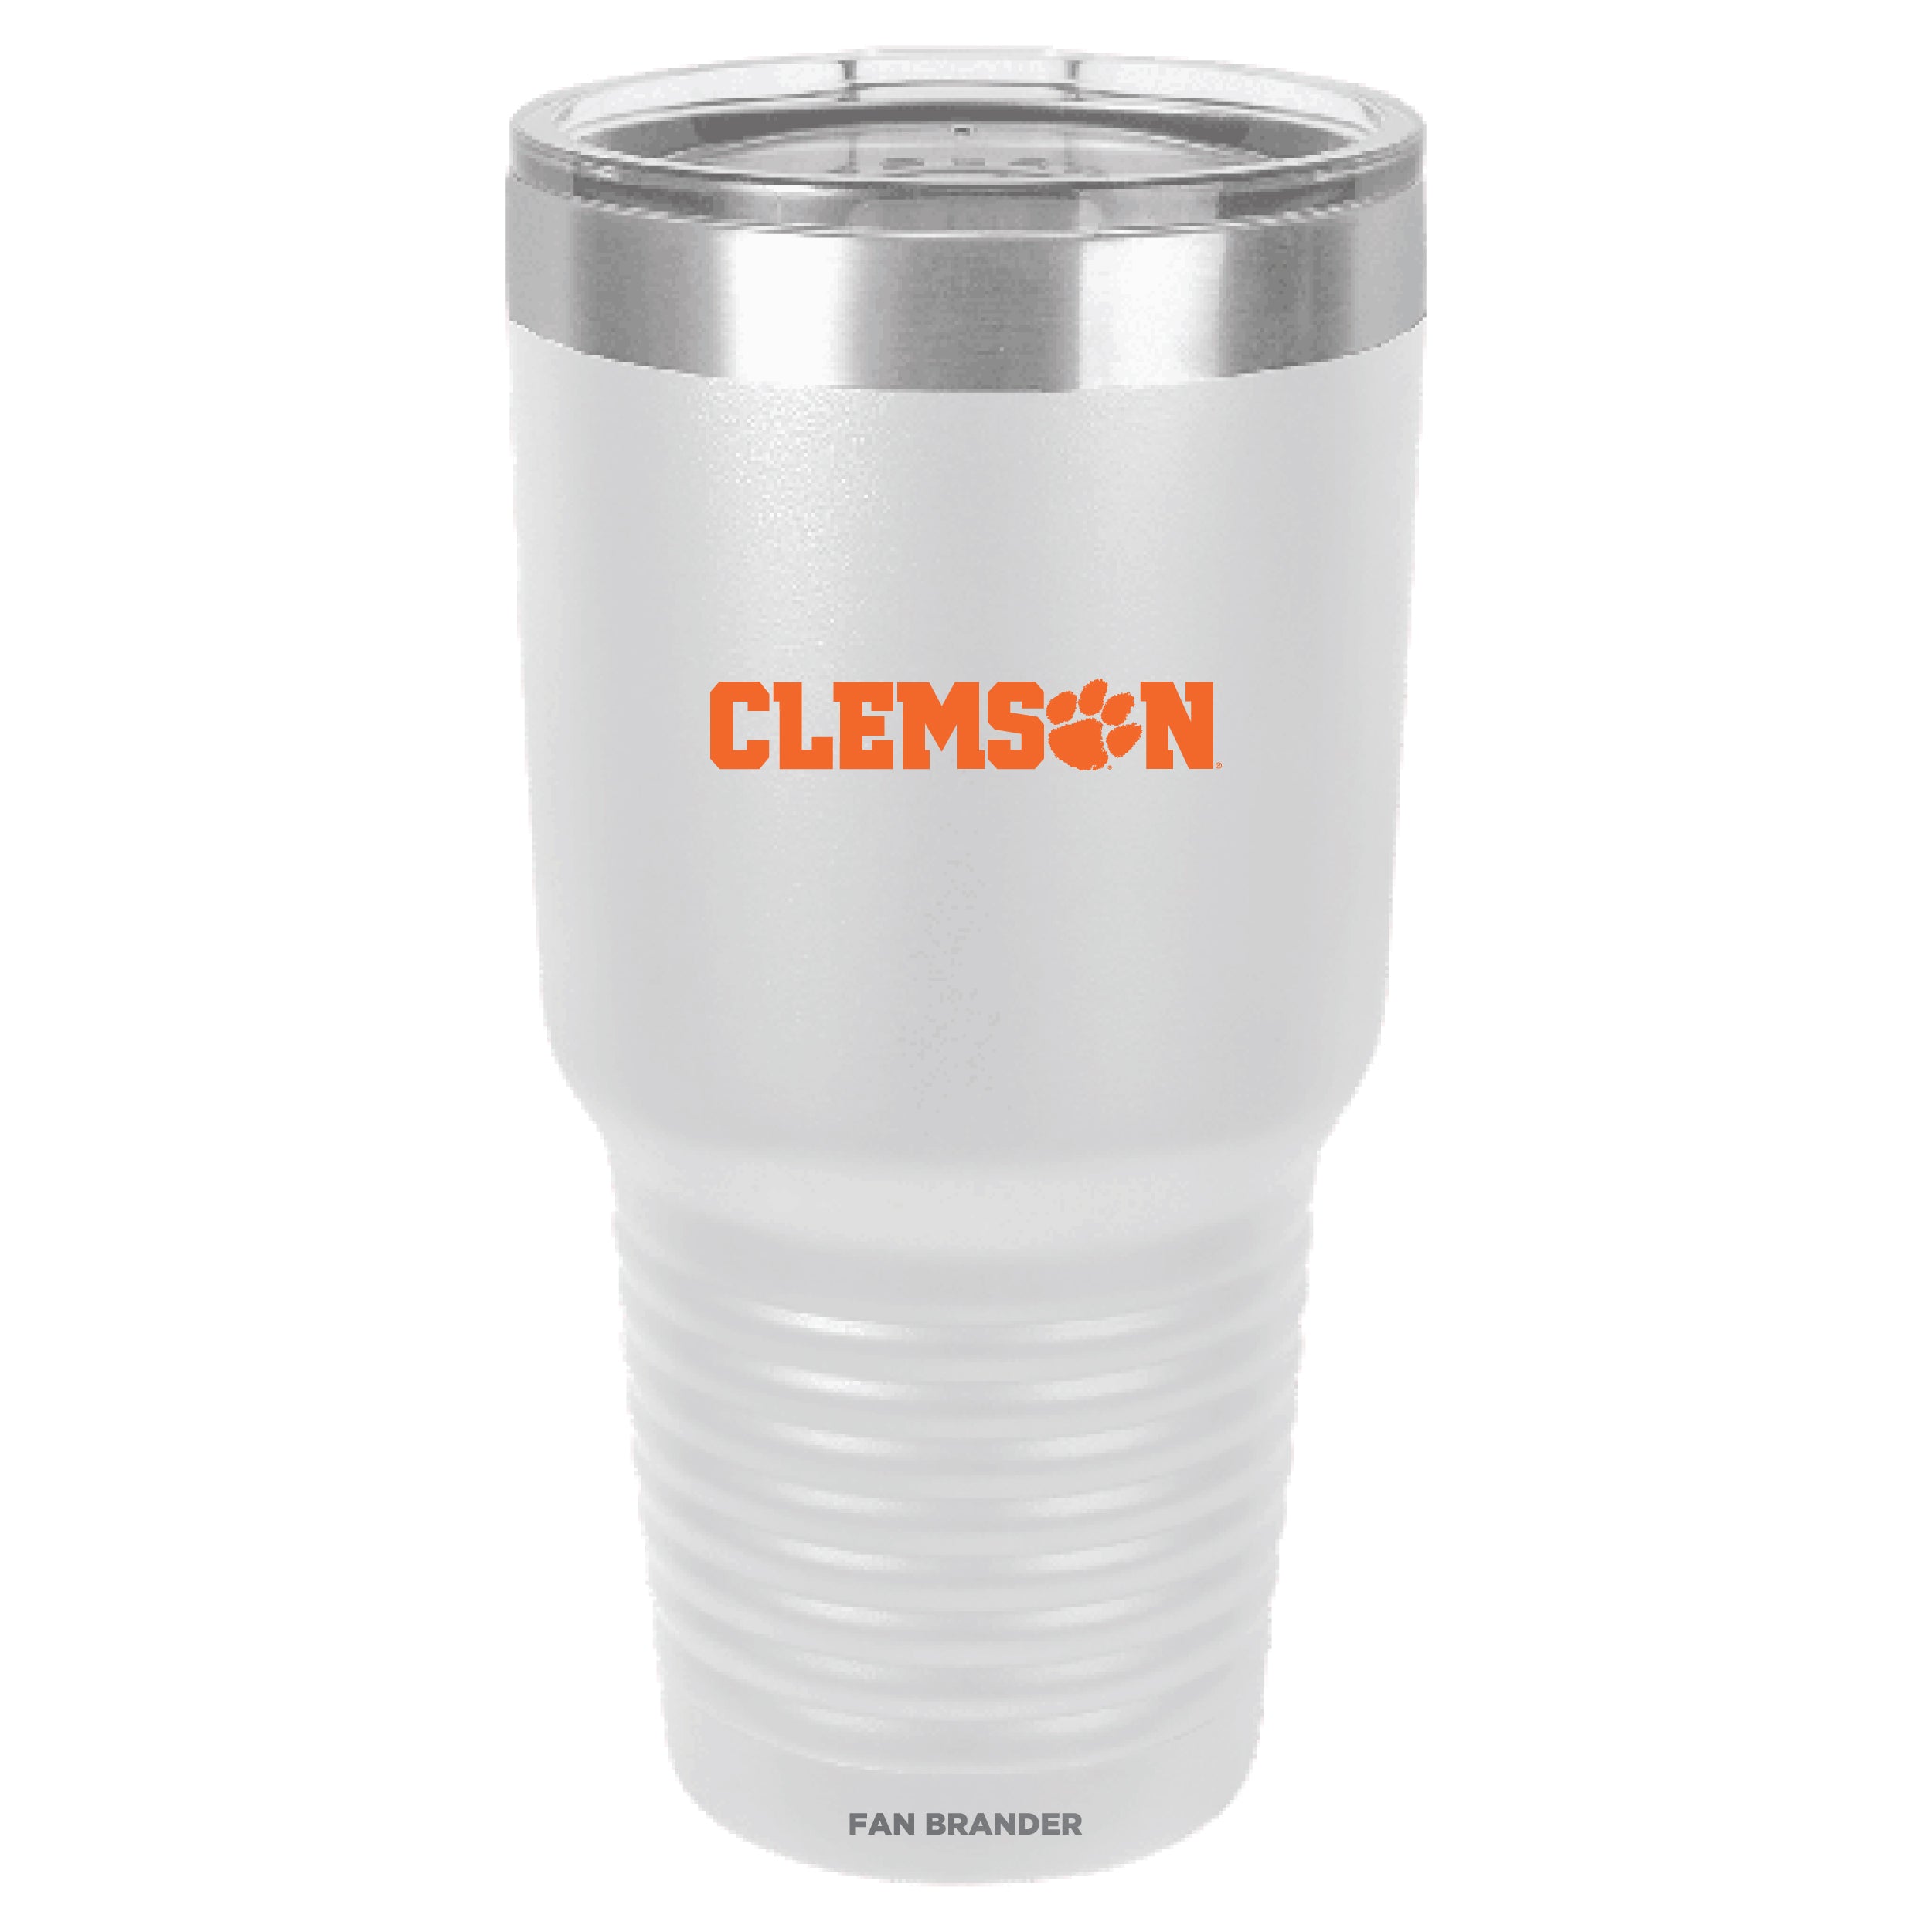 Fan Brander 30oz Stainless Steel Tumbler with Clemson Tigers Secondary Logo